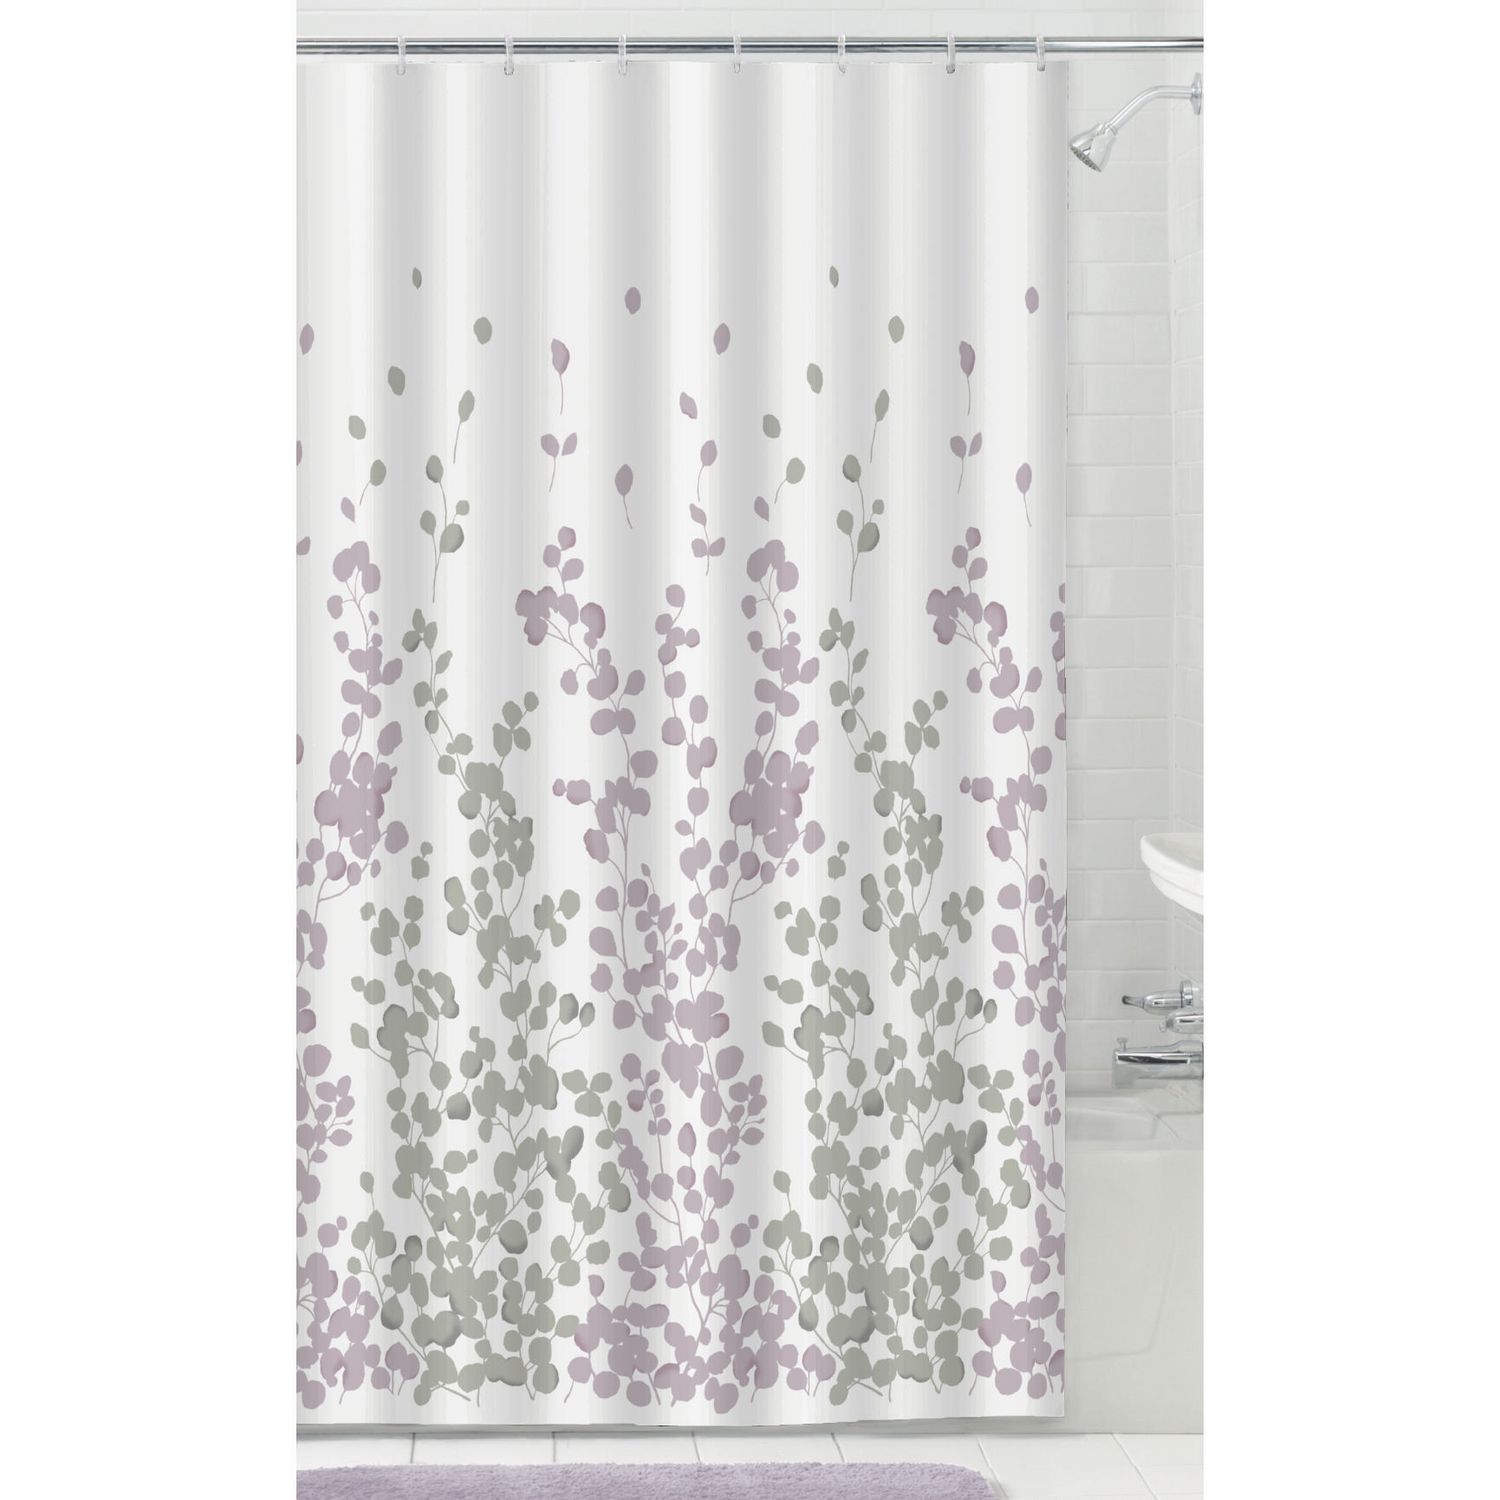 Mainstays Fabric Shower Curtain With 12, Mainstays Fabric Shower Curtain